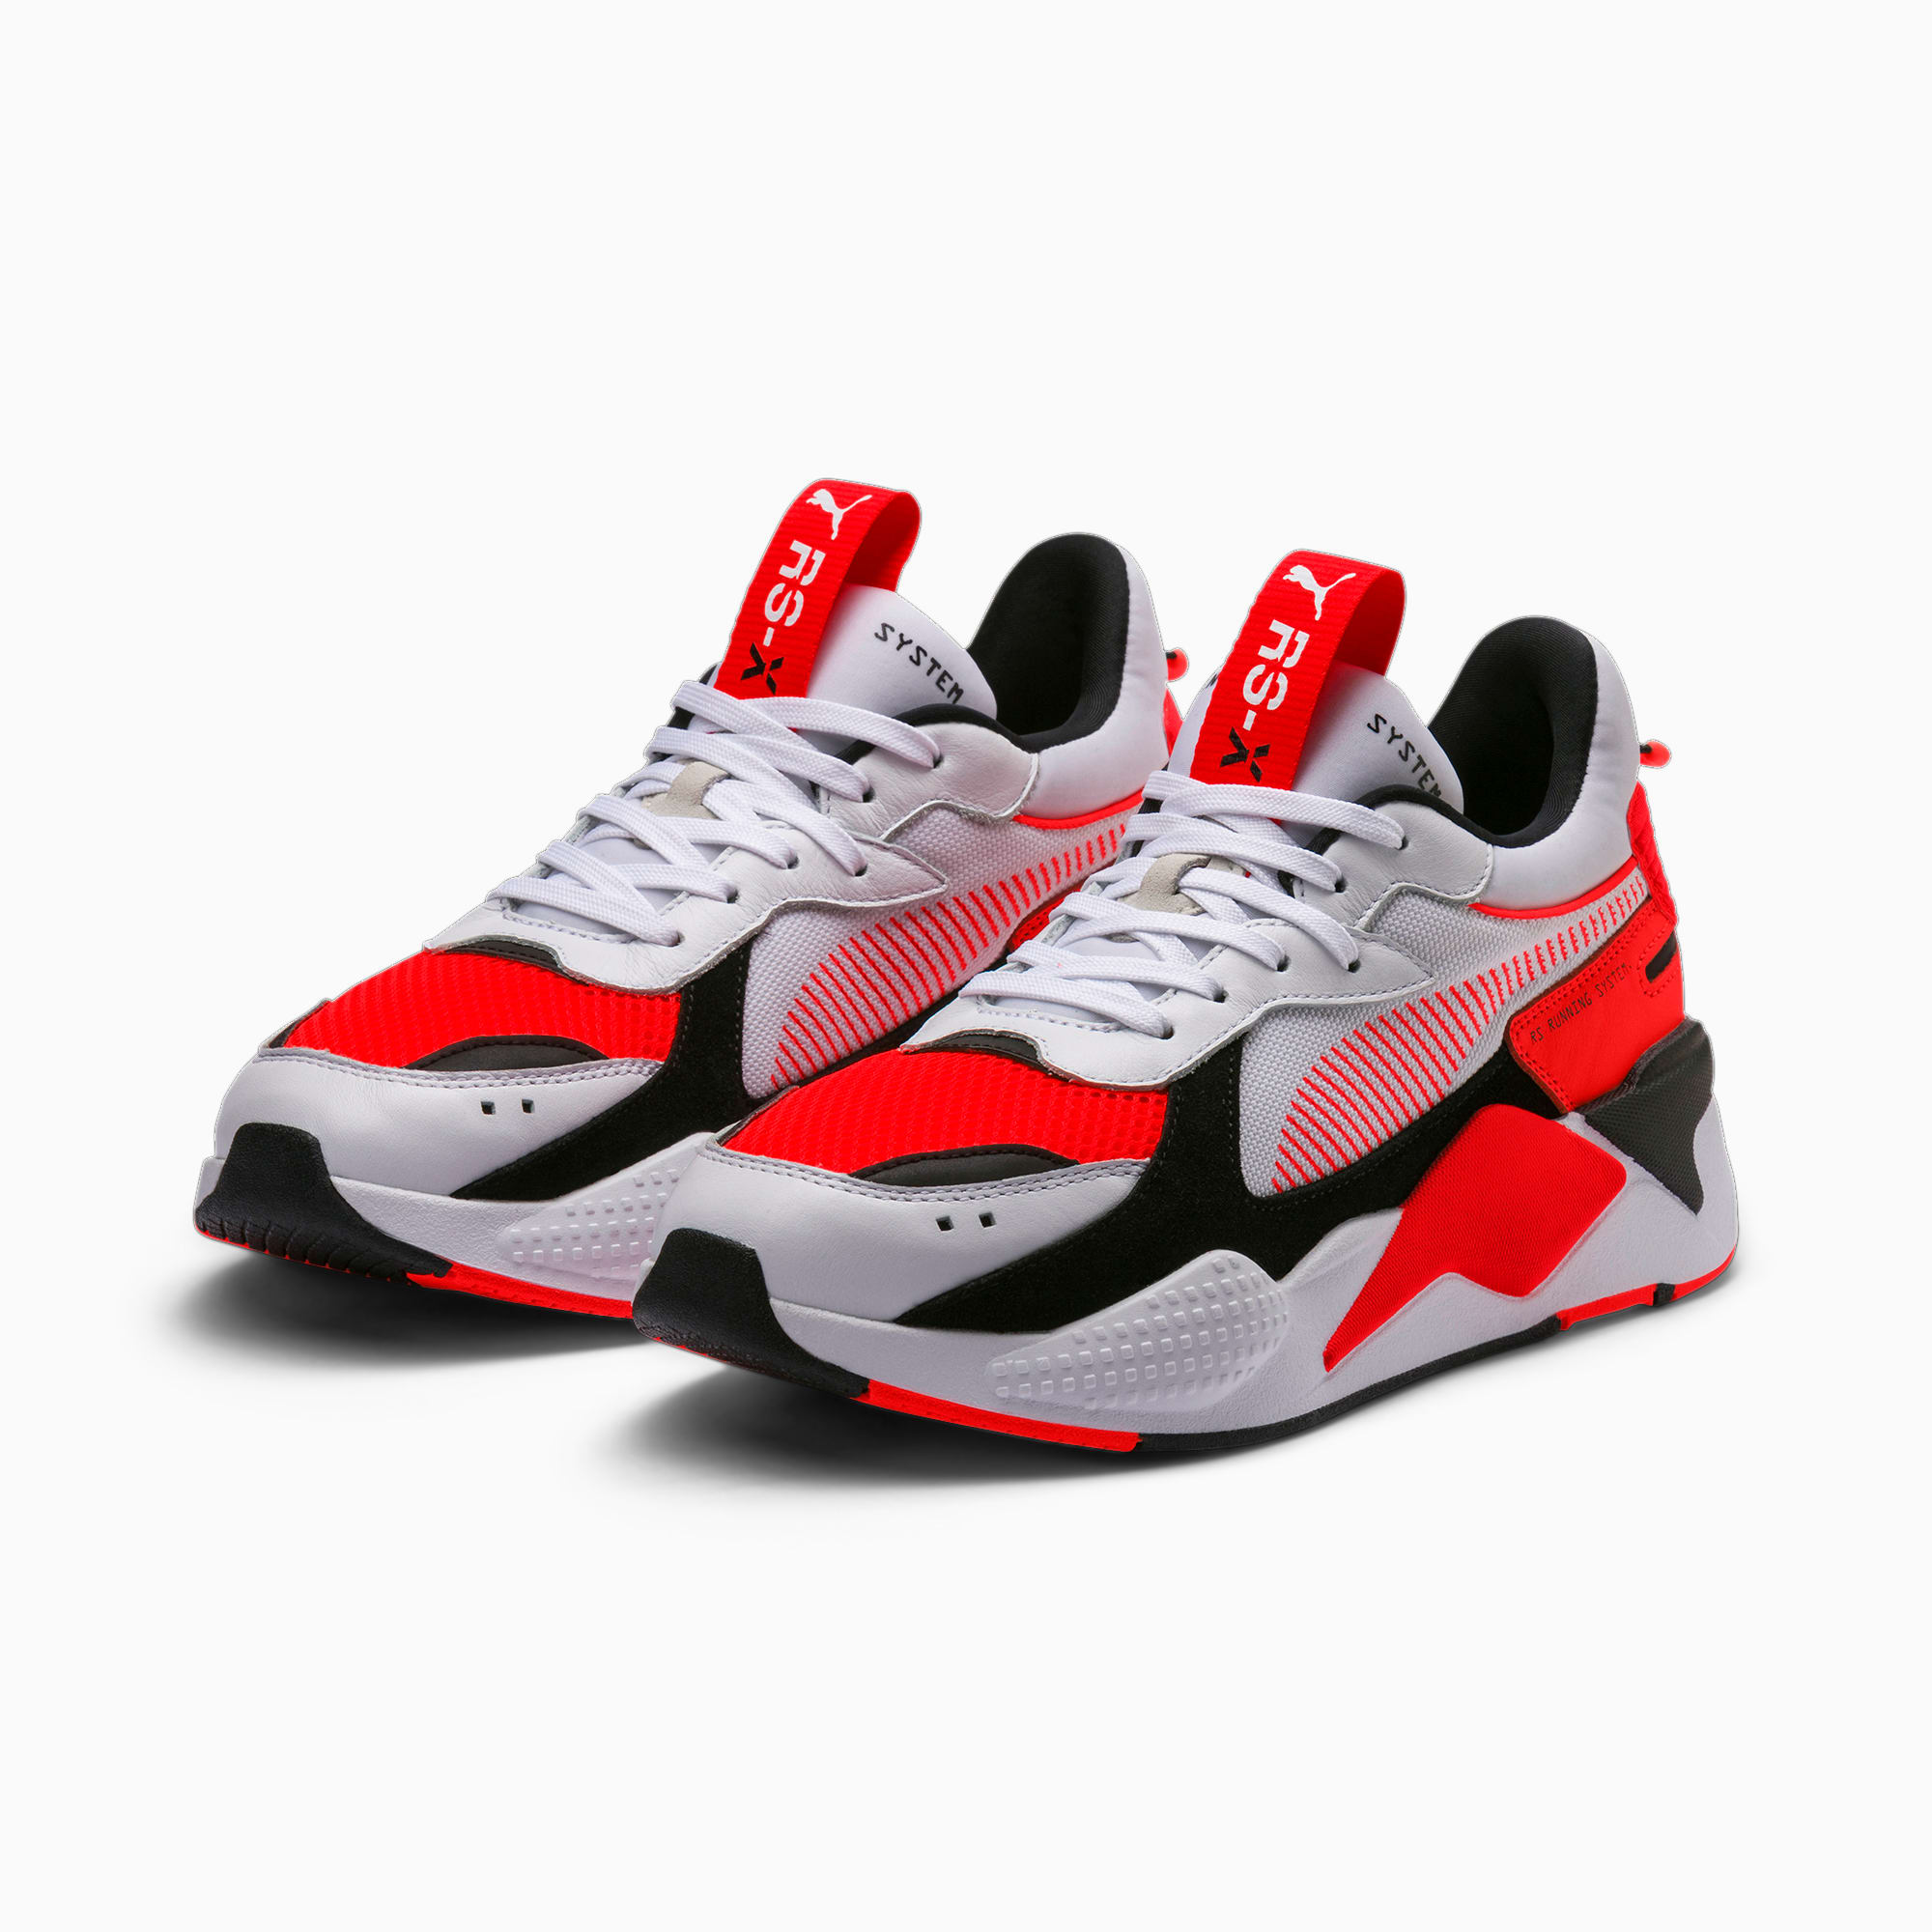 RS-X Reinvention Men's Sneakers | PUMA US